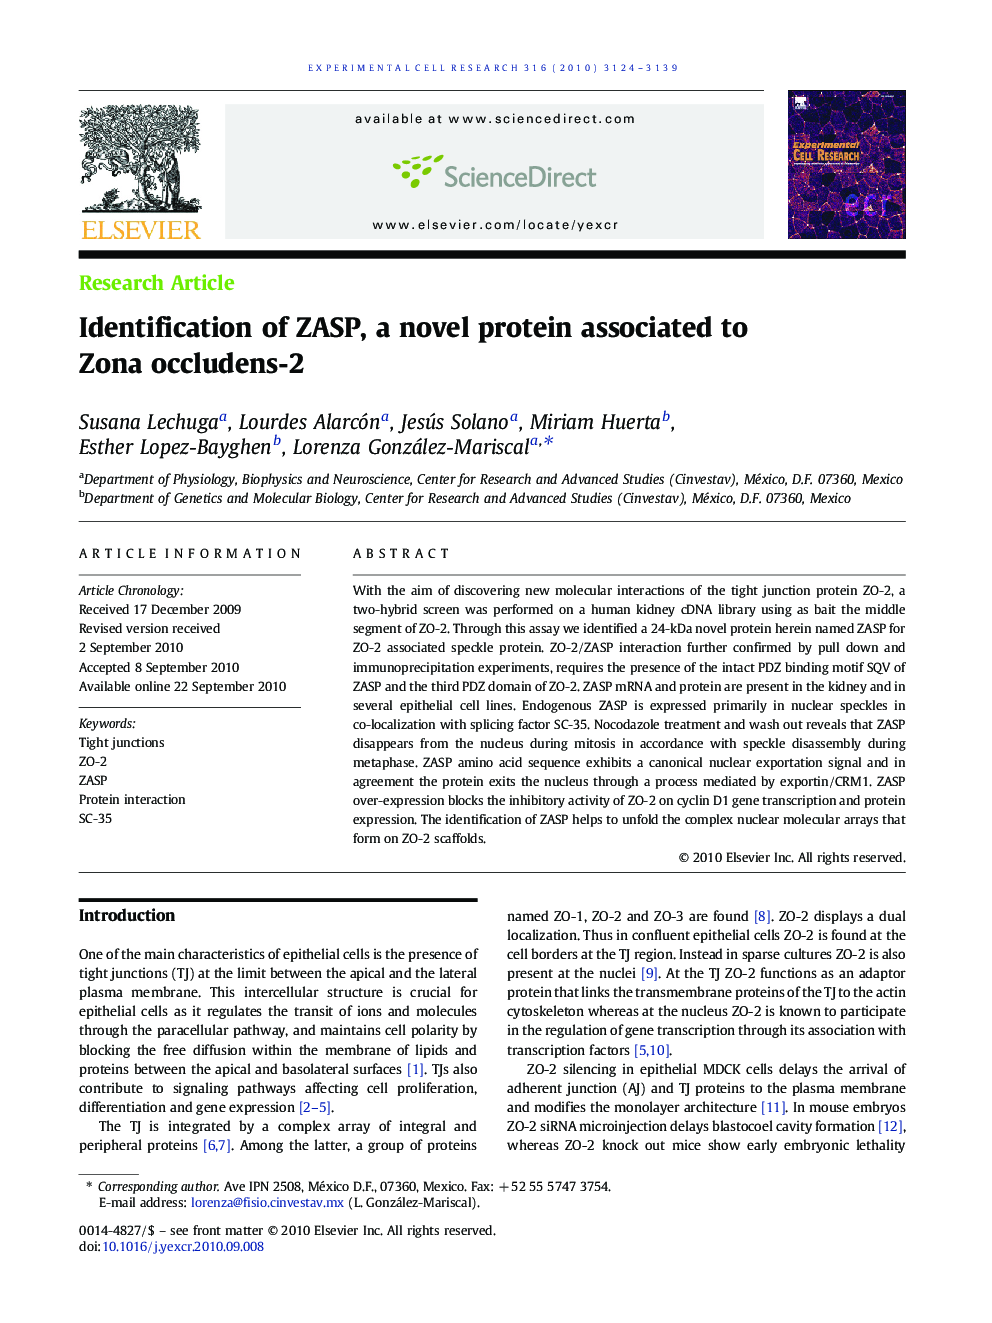 Identification of ZASP, a novel protein associated to Zona occludens-2